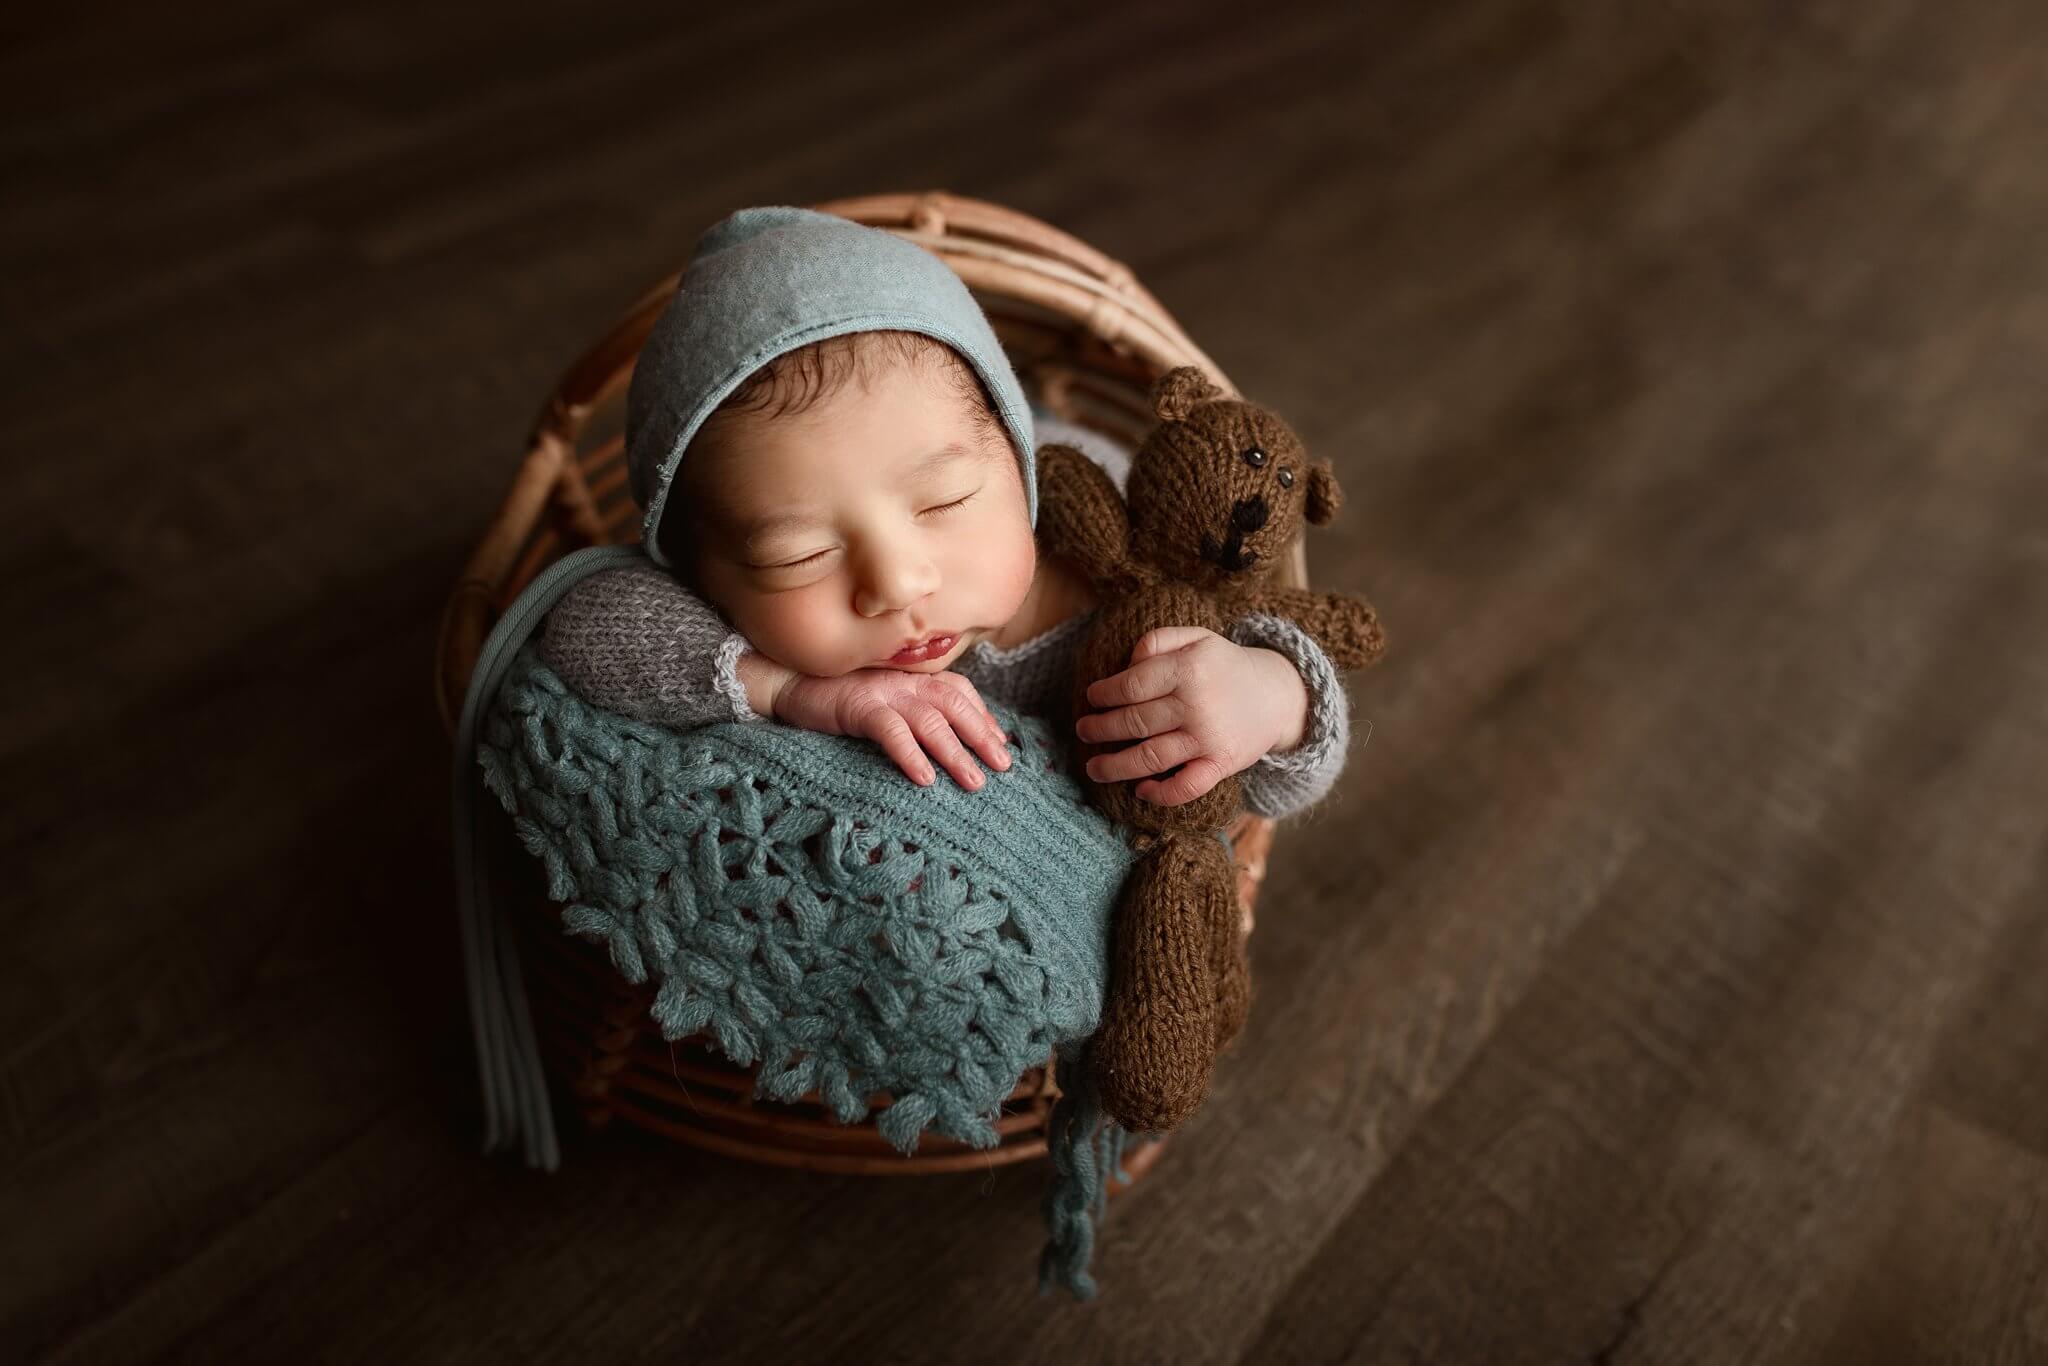 Newborn baby boy in a basket and holding a teddy bear in ocean colored bonnet